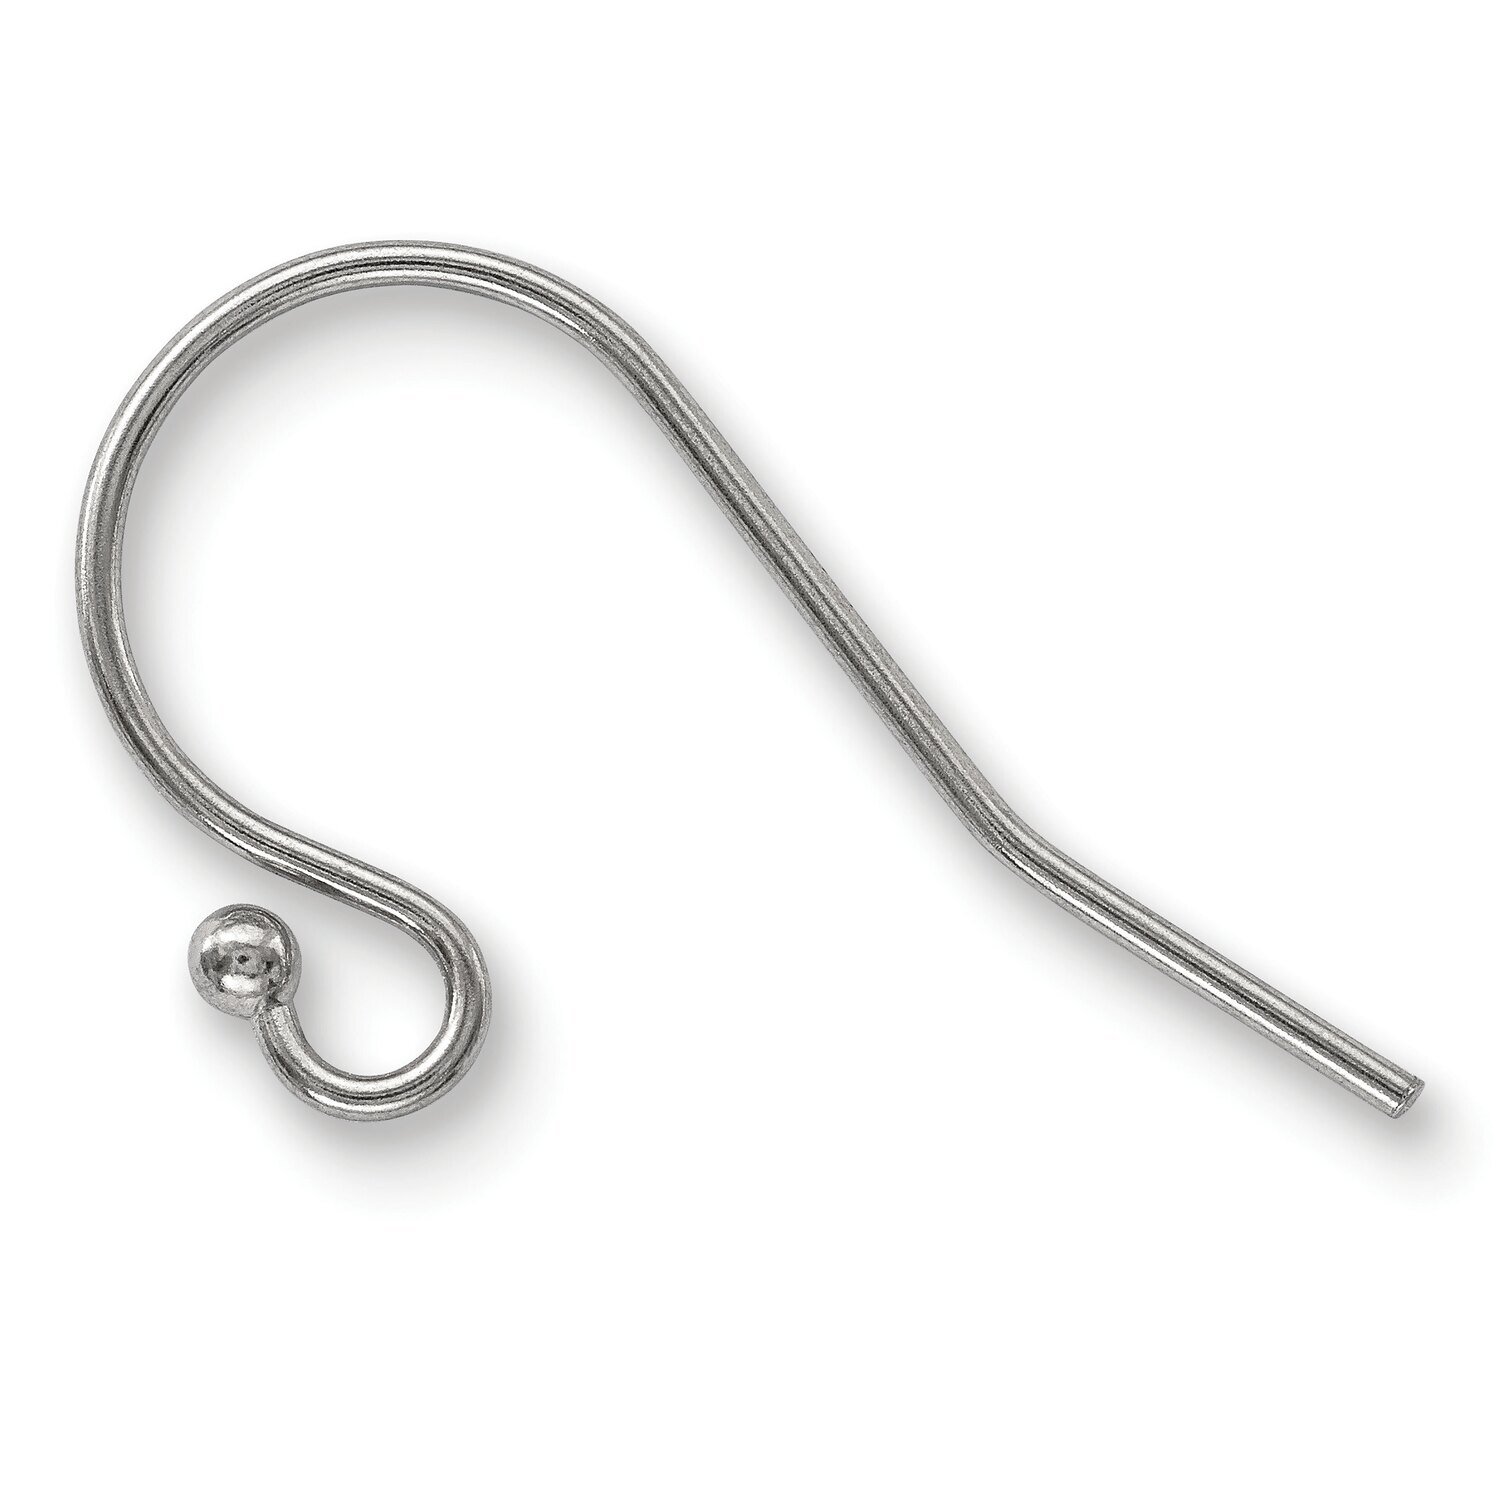 Ball End Wire Shepherd Hook Component 14k White Gold WG4876